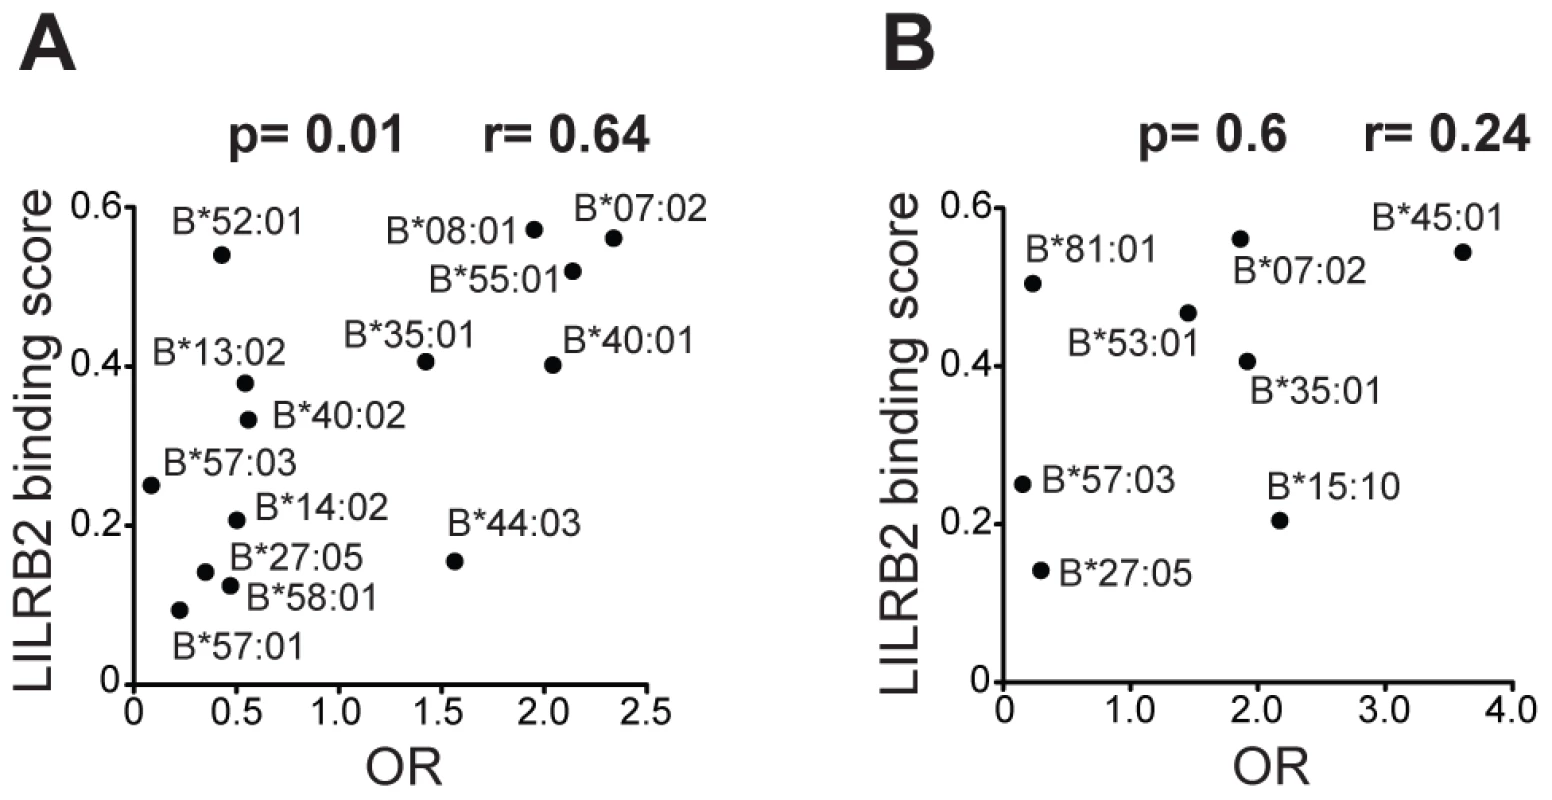 LILRB2 binding strength and odds ratios for viral load control for individual <i>HLA-B</i> alleles.